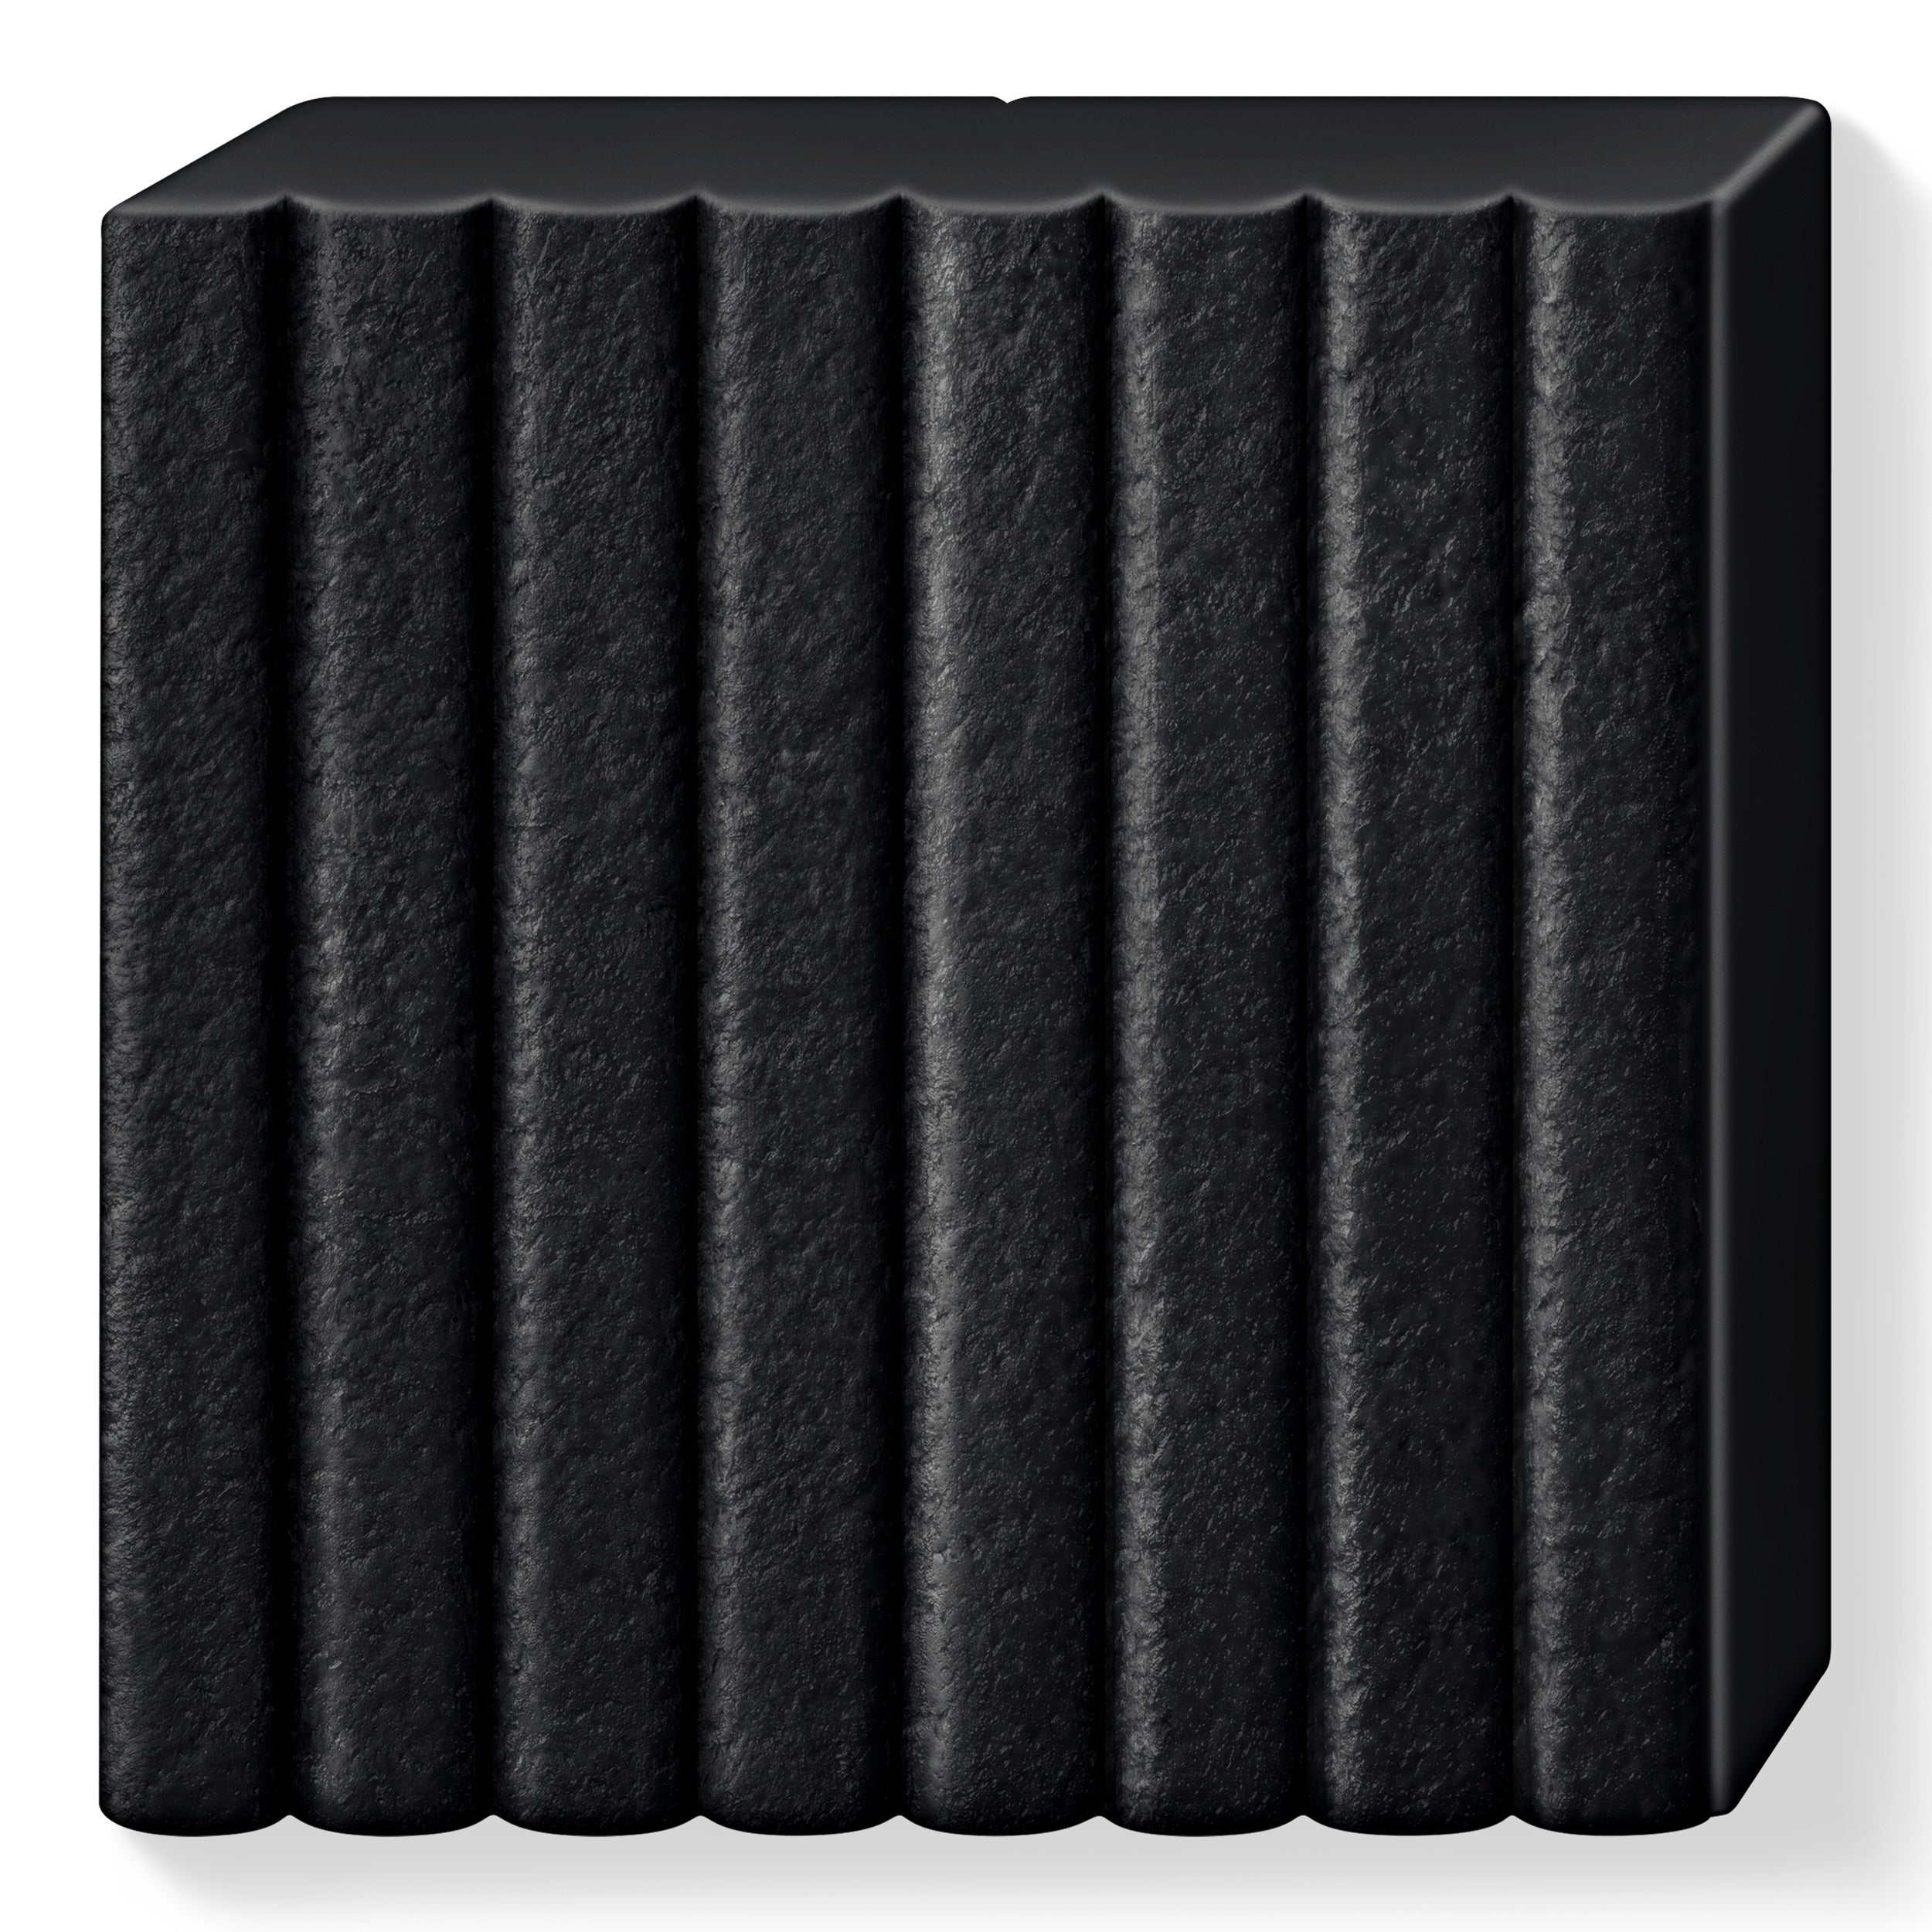 Fimo Leather Effect Polymer Clay Standard Block 57g (2oz) - Black